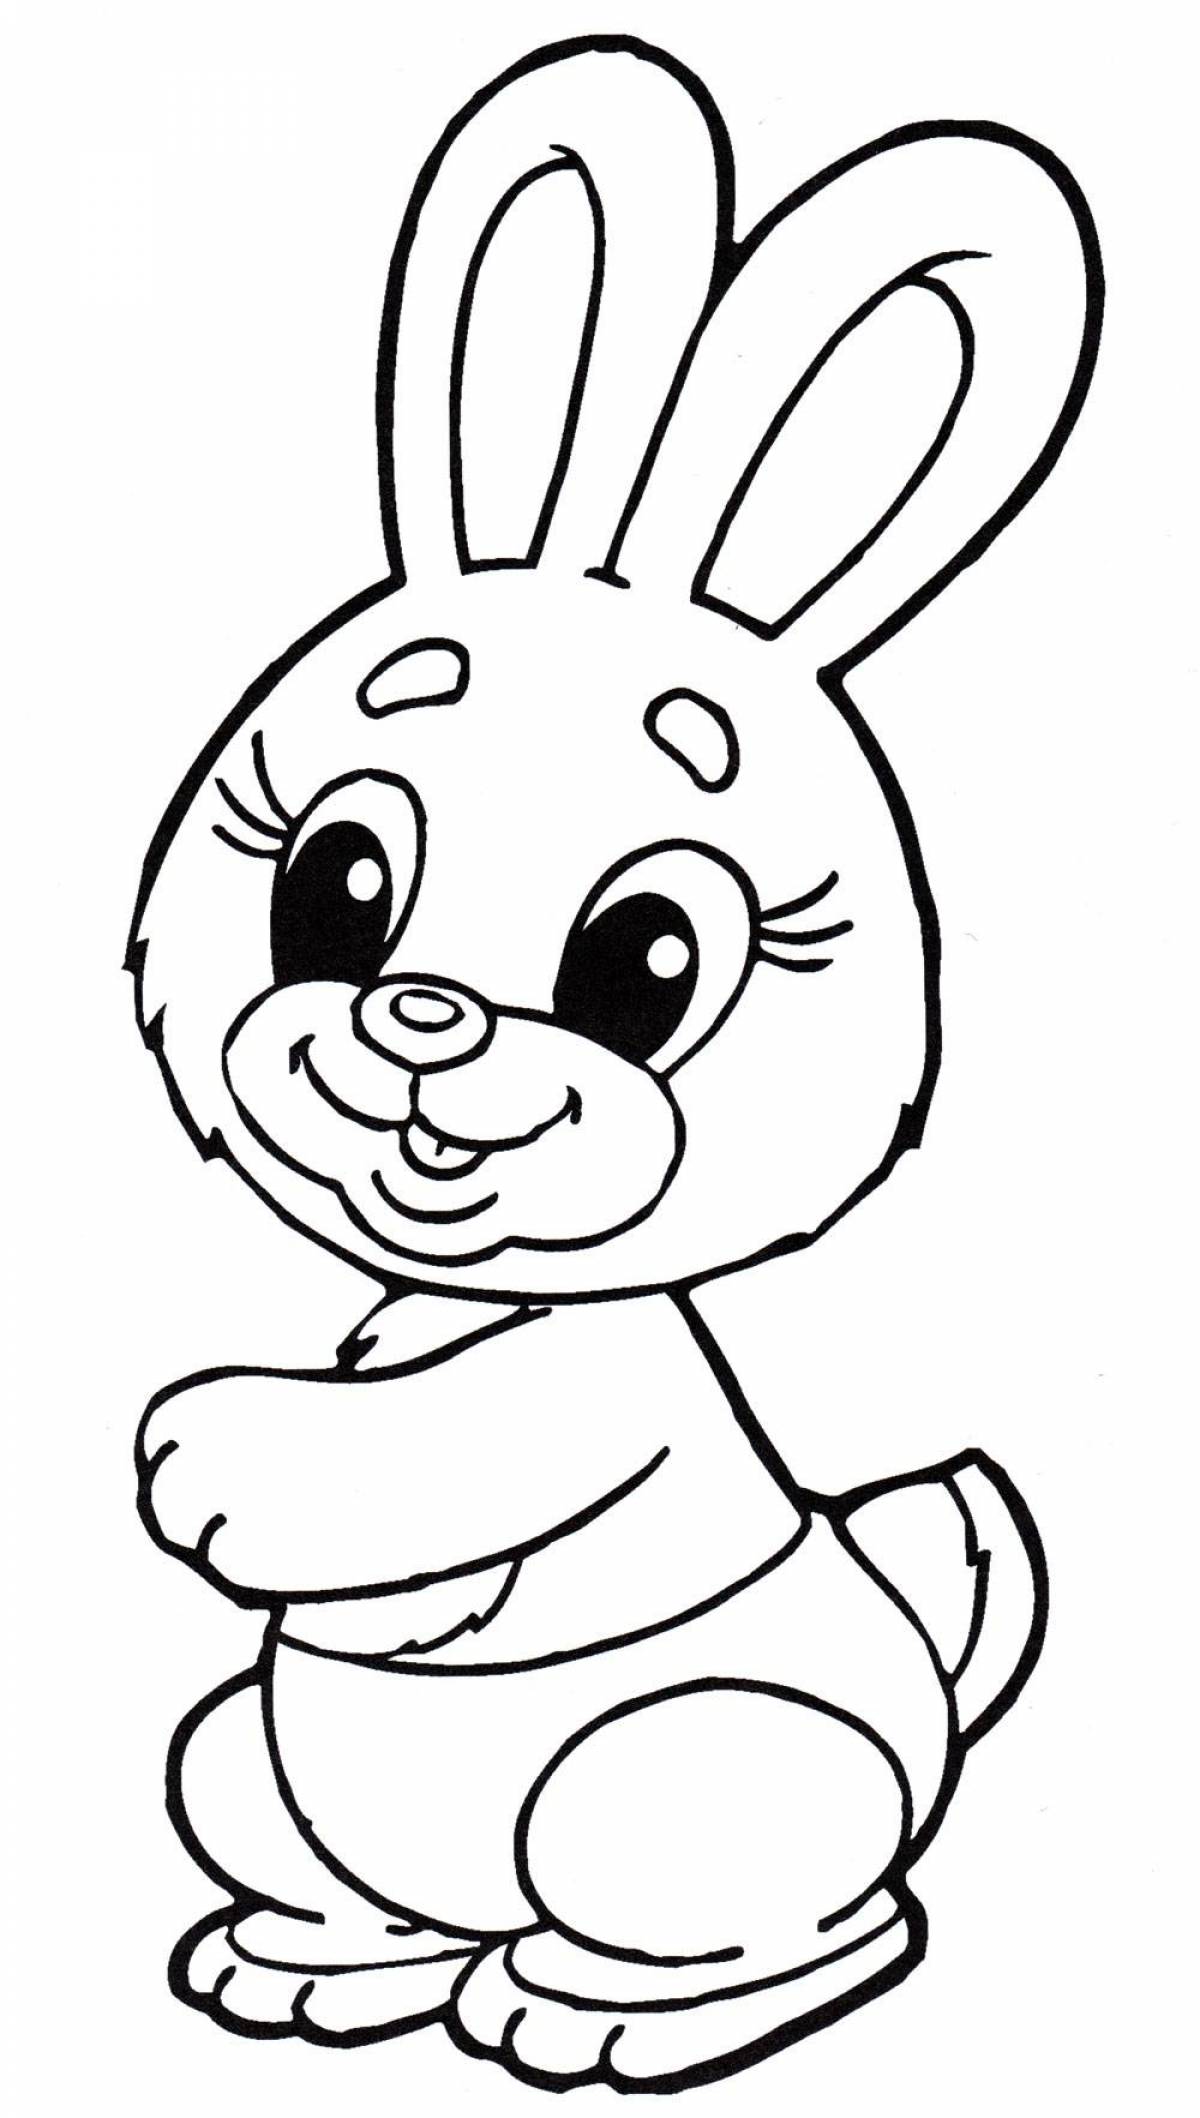 Colorful bunny coloring book for 3-4 year olds